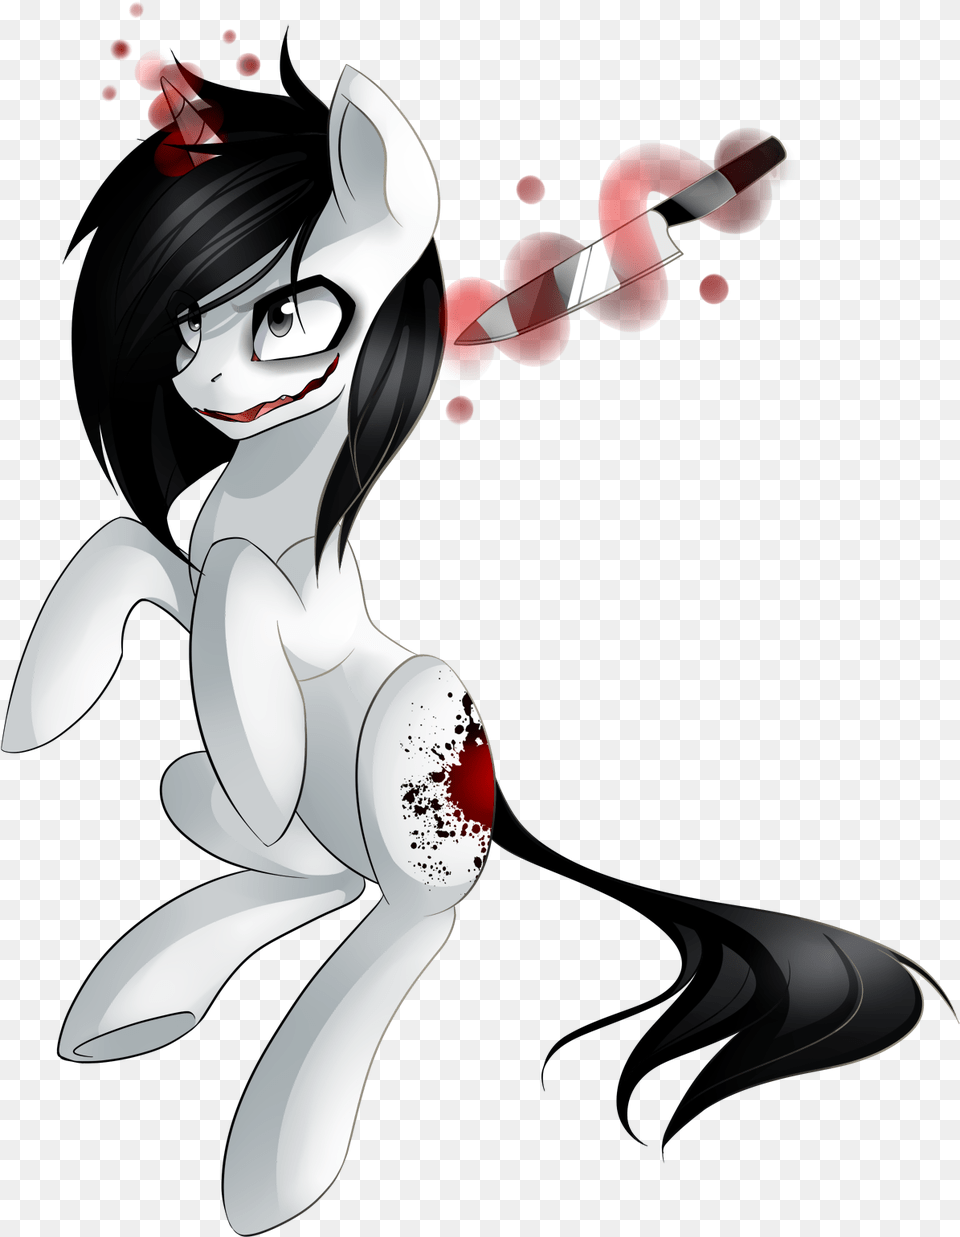 Jeff The Killer Pony By Brittmyerz1997 D83m3xf Pony, Publication, Book, Comics, Adult Free Png Download